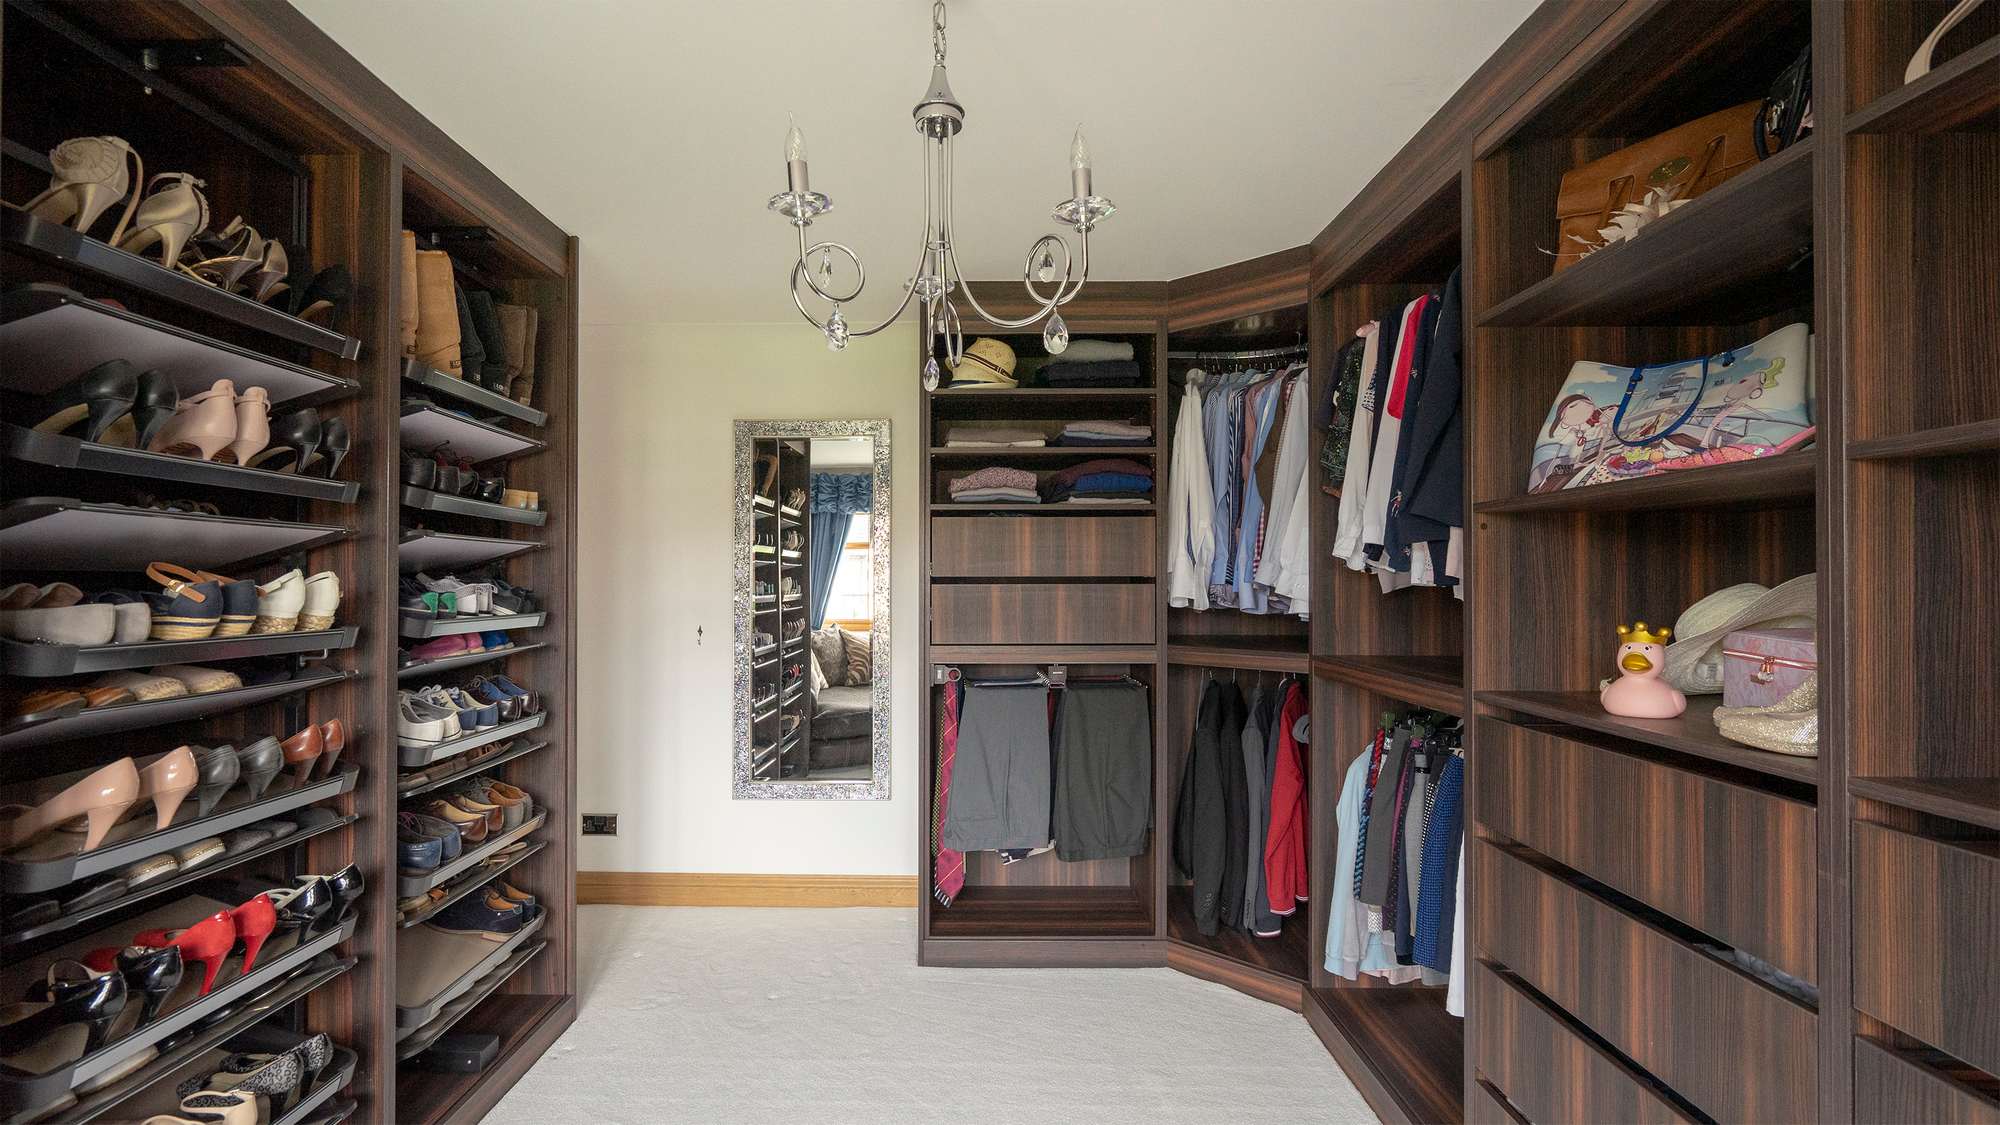 Image showing most of the walk-in wardrobe with the rotating shoe racks on the left side and clothes storage on the right.